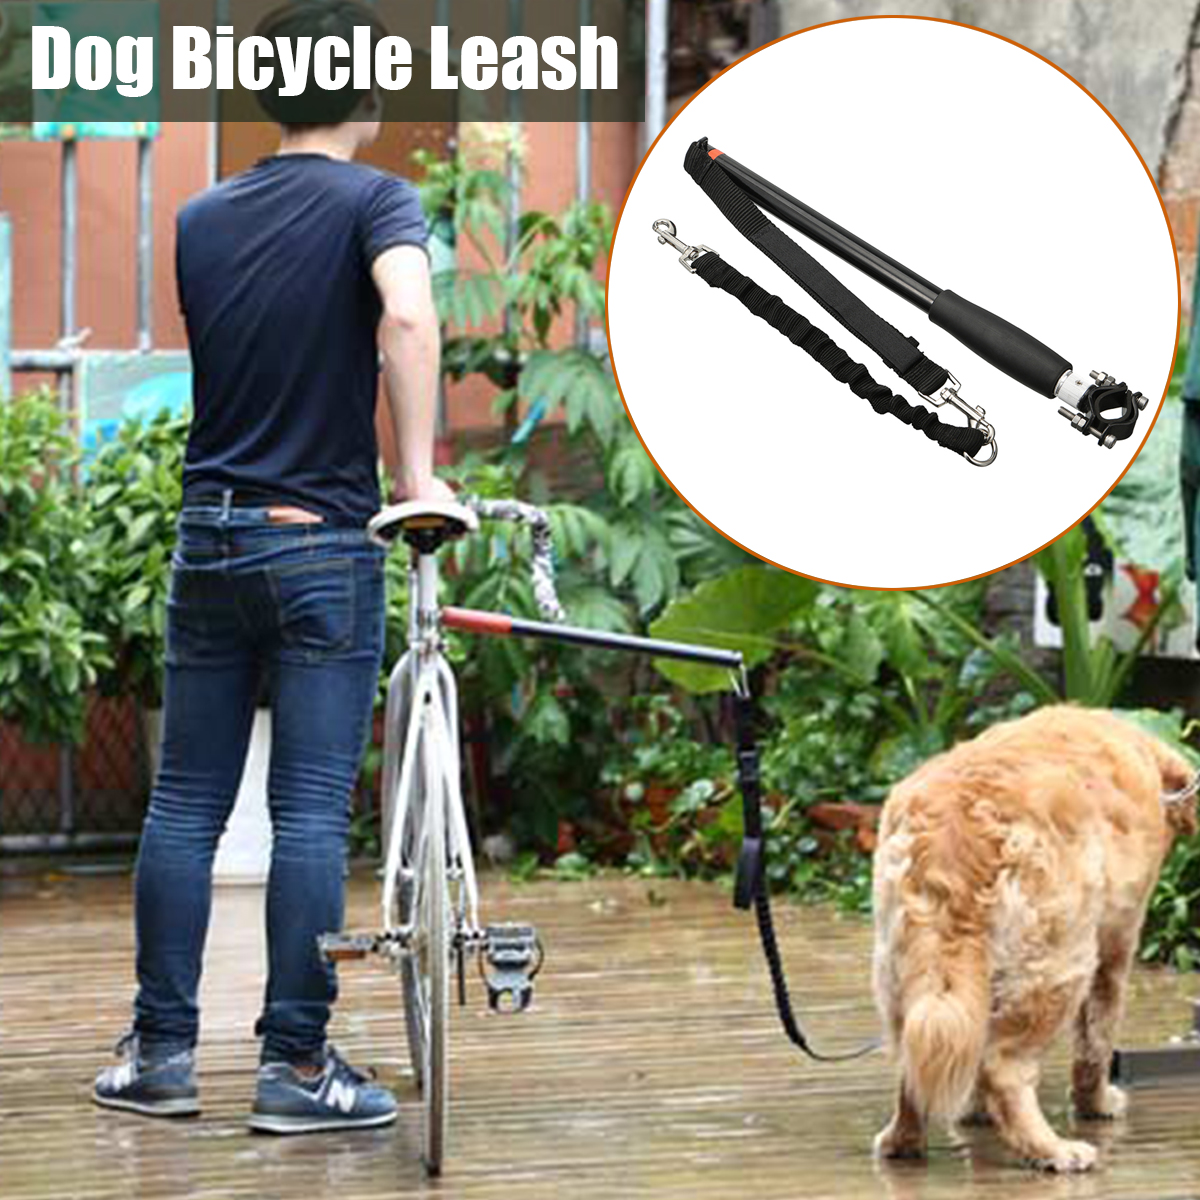 Dog-Bicycle-Leash-Hands-Free-Lead-Pet-Walker-Run-Train-Ride-Bike-Distance-Keeper-Traction-Rope-1518226